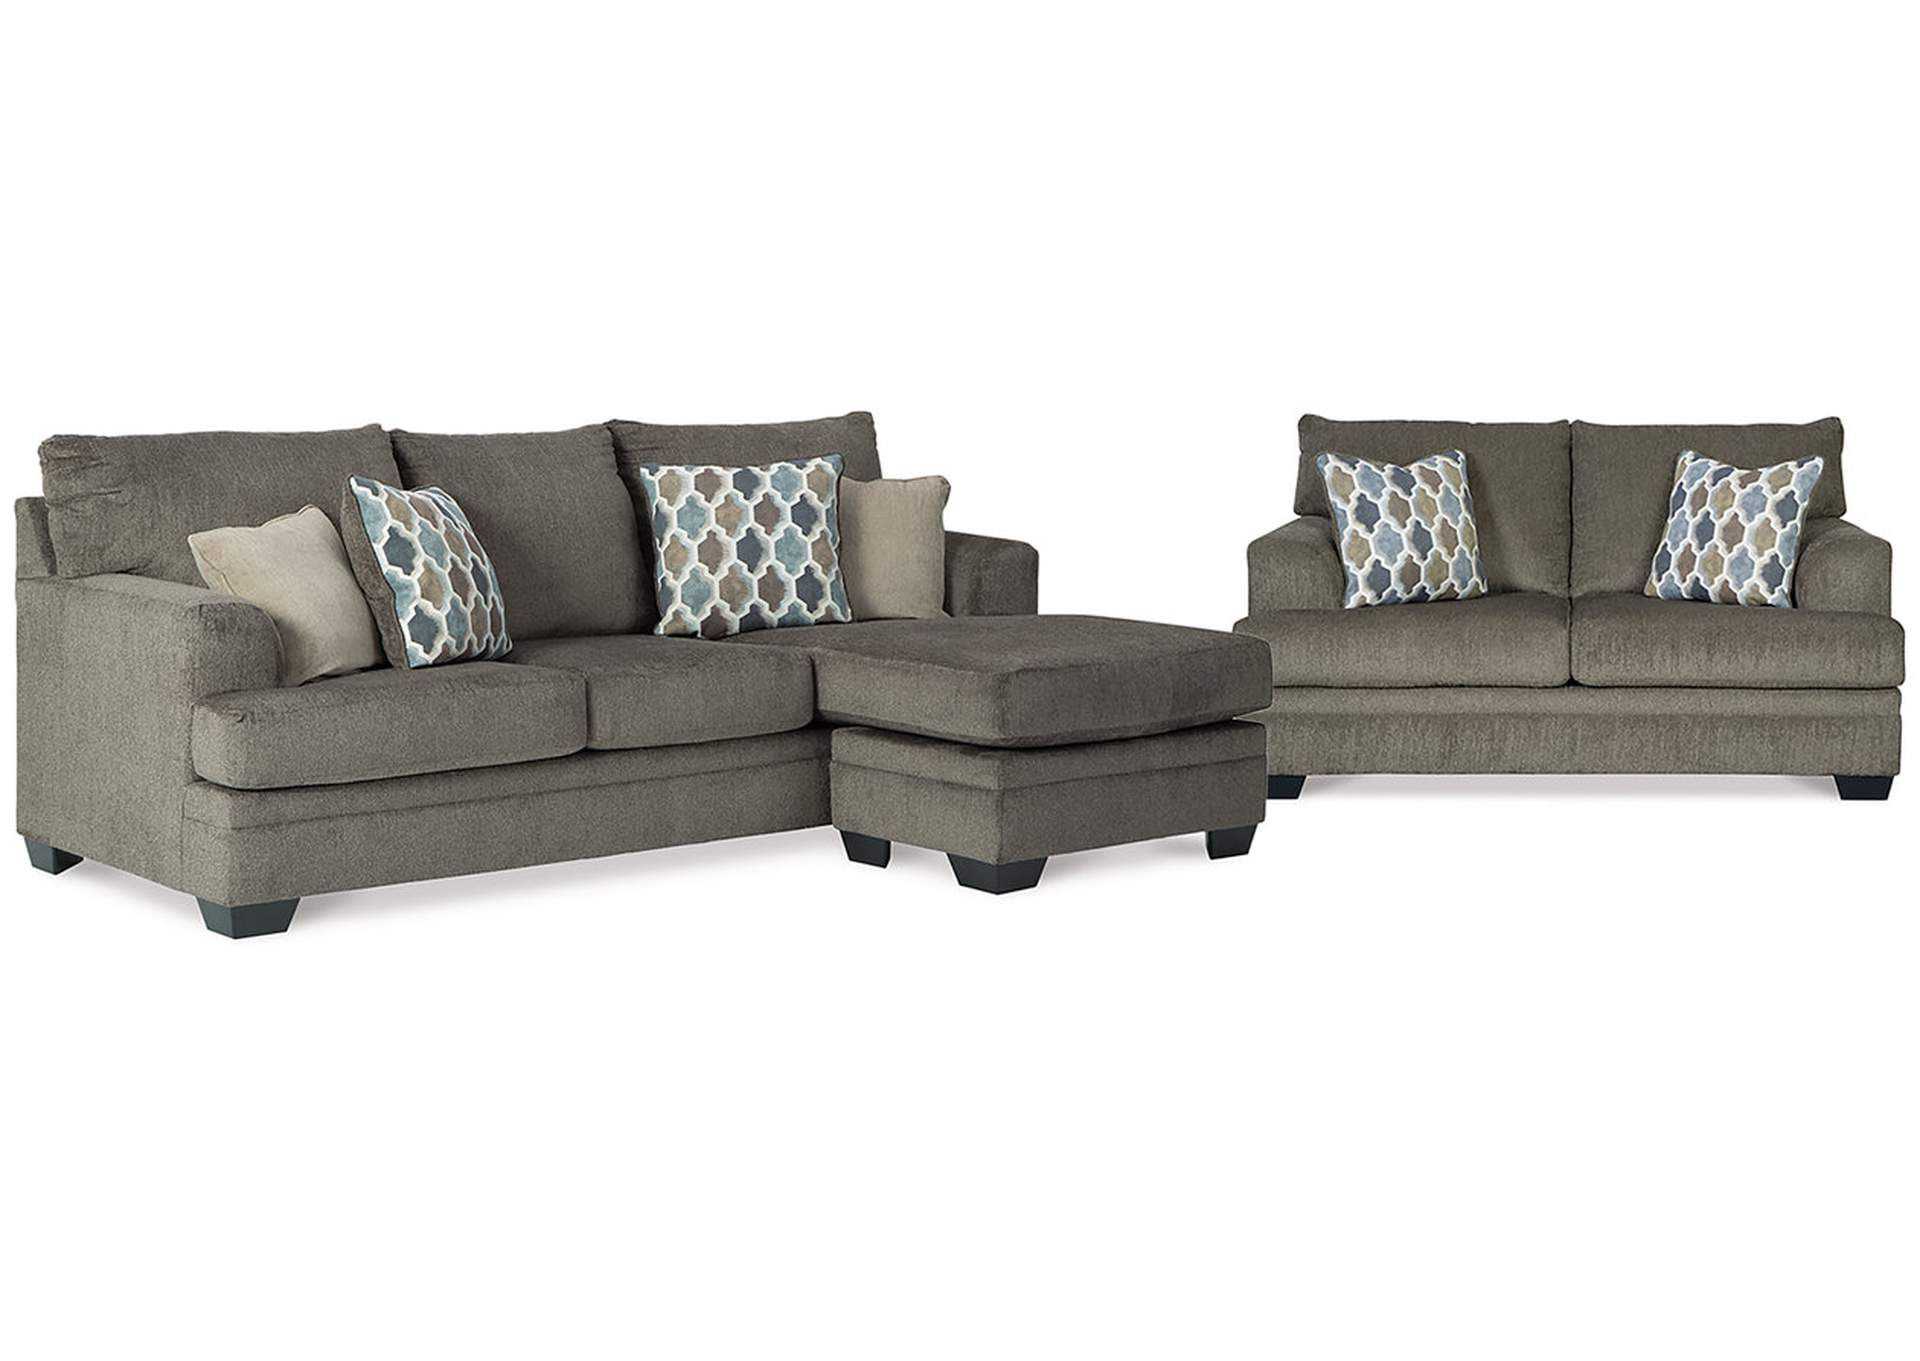 Dorsten Sofa Chaise and Loveseat,Signature Design By Ashley